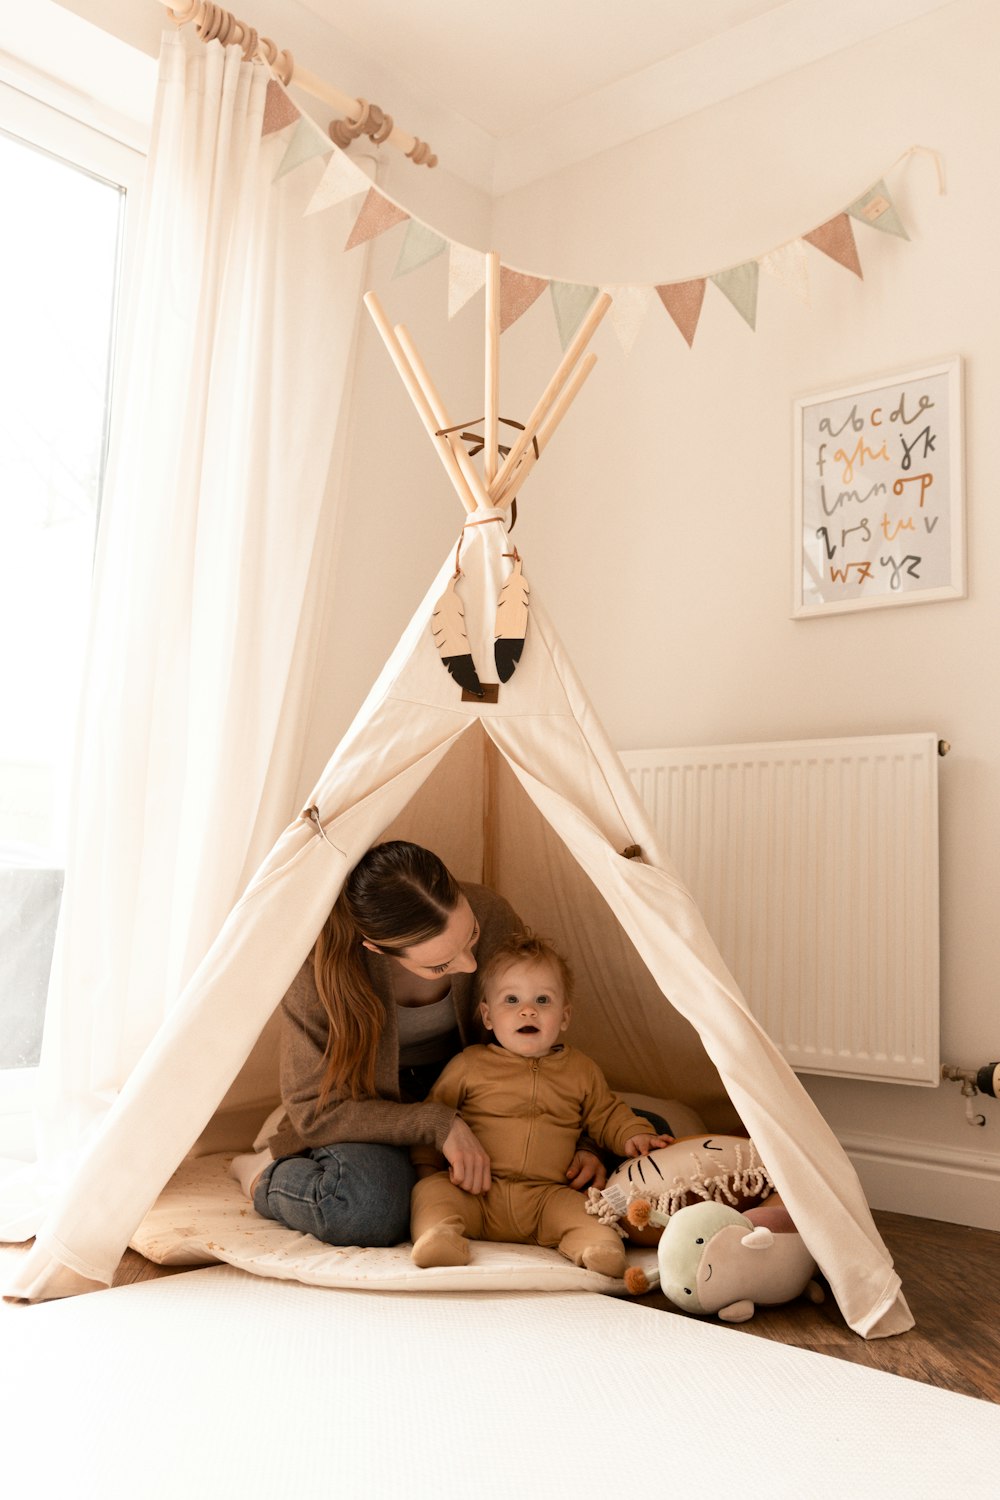 a woman and a child sitting in a teepee